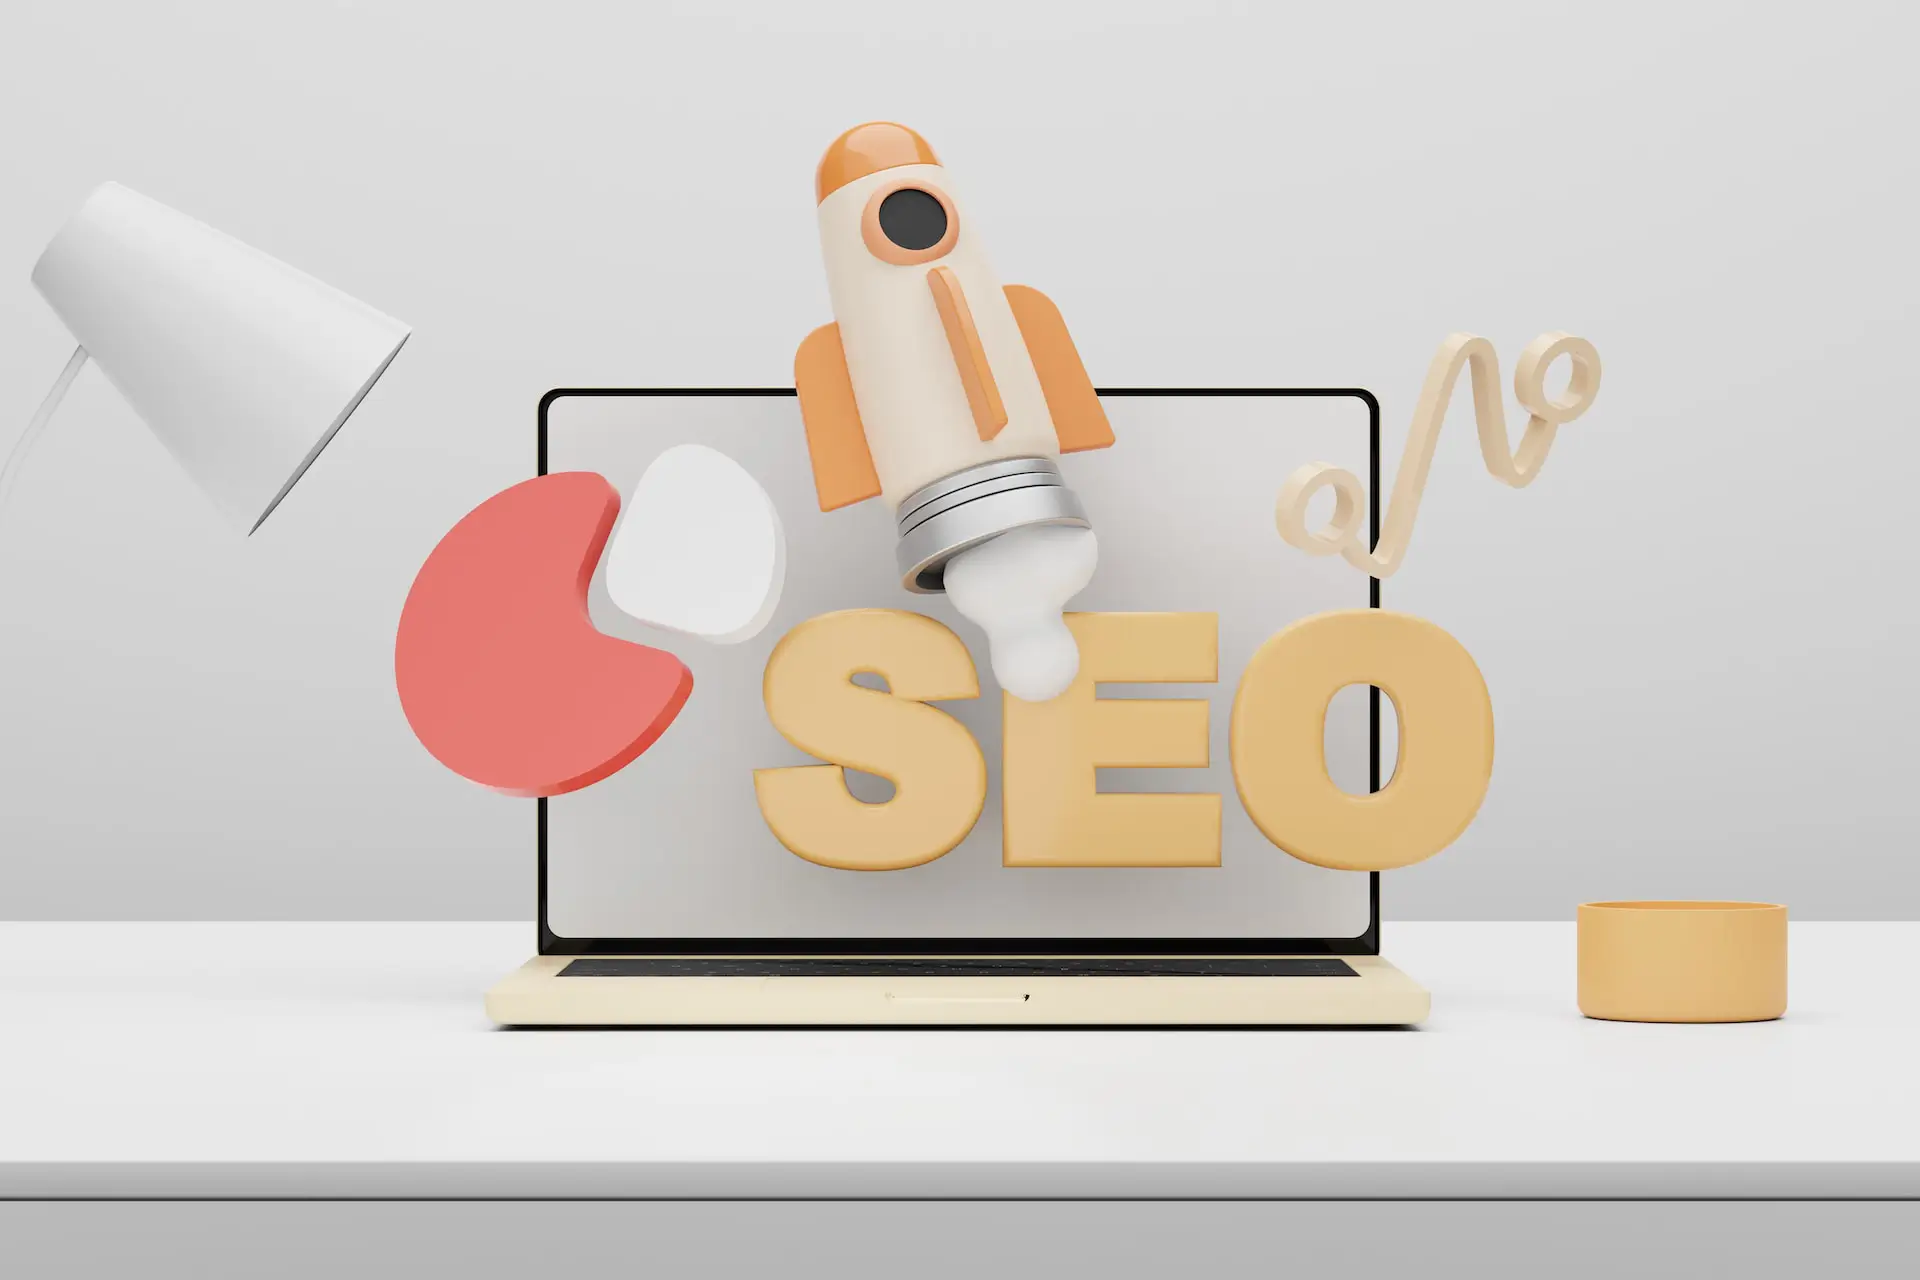 SEO stands for what?